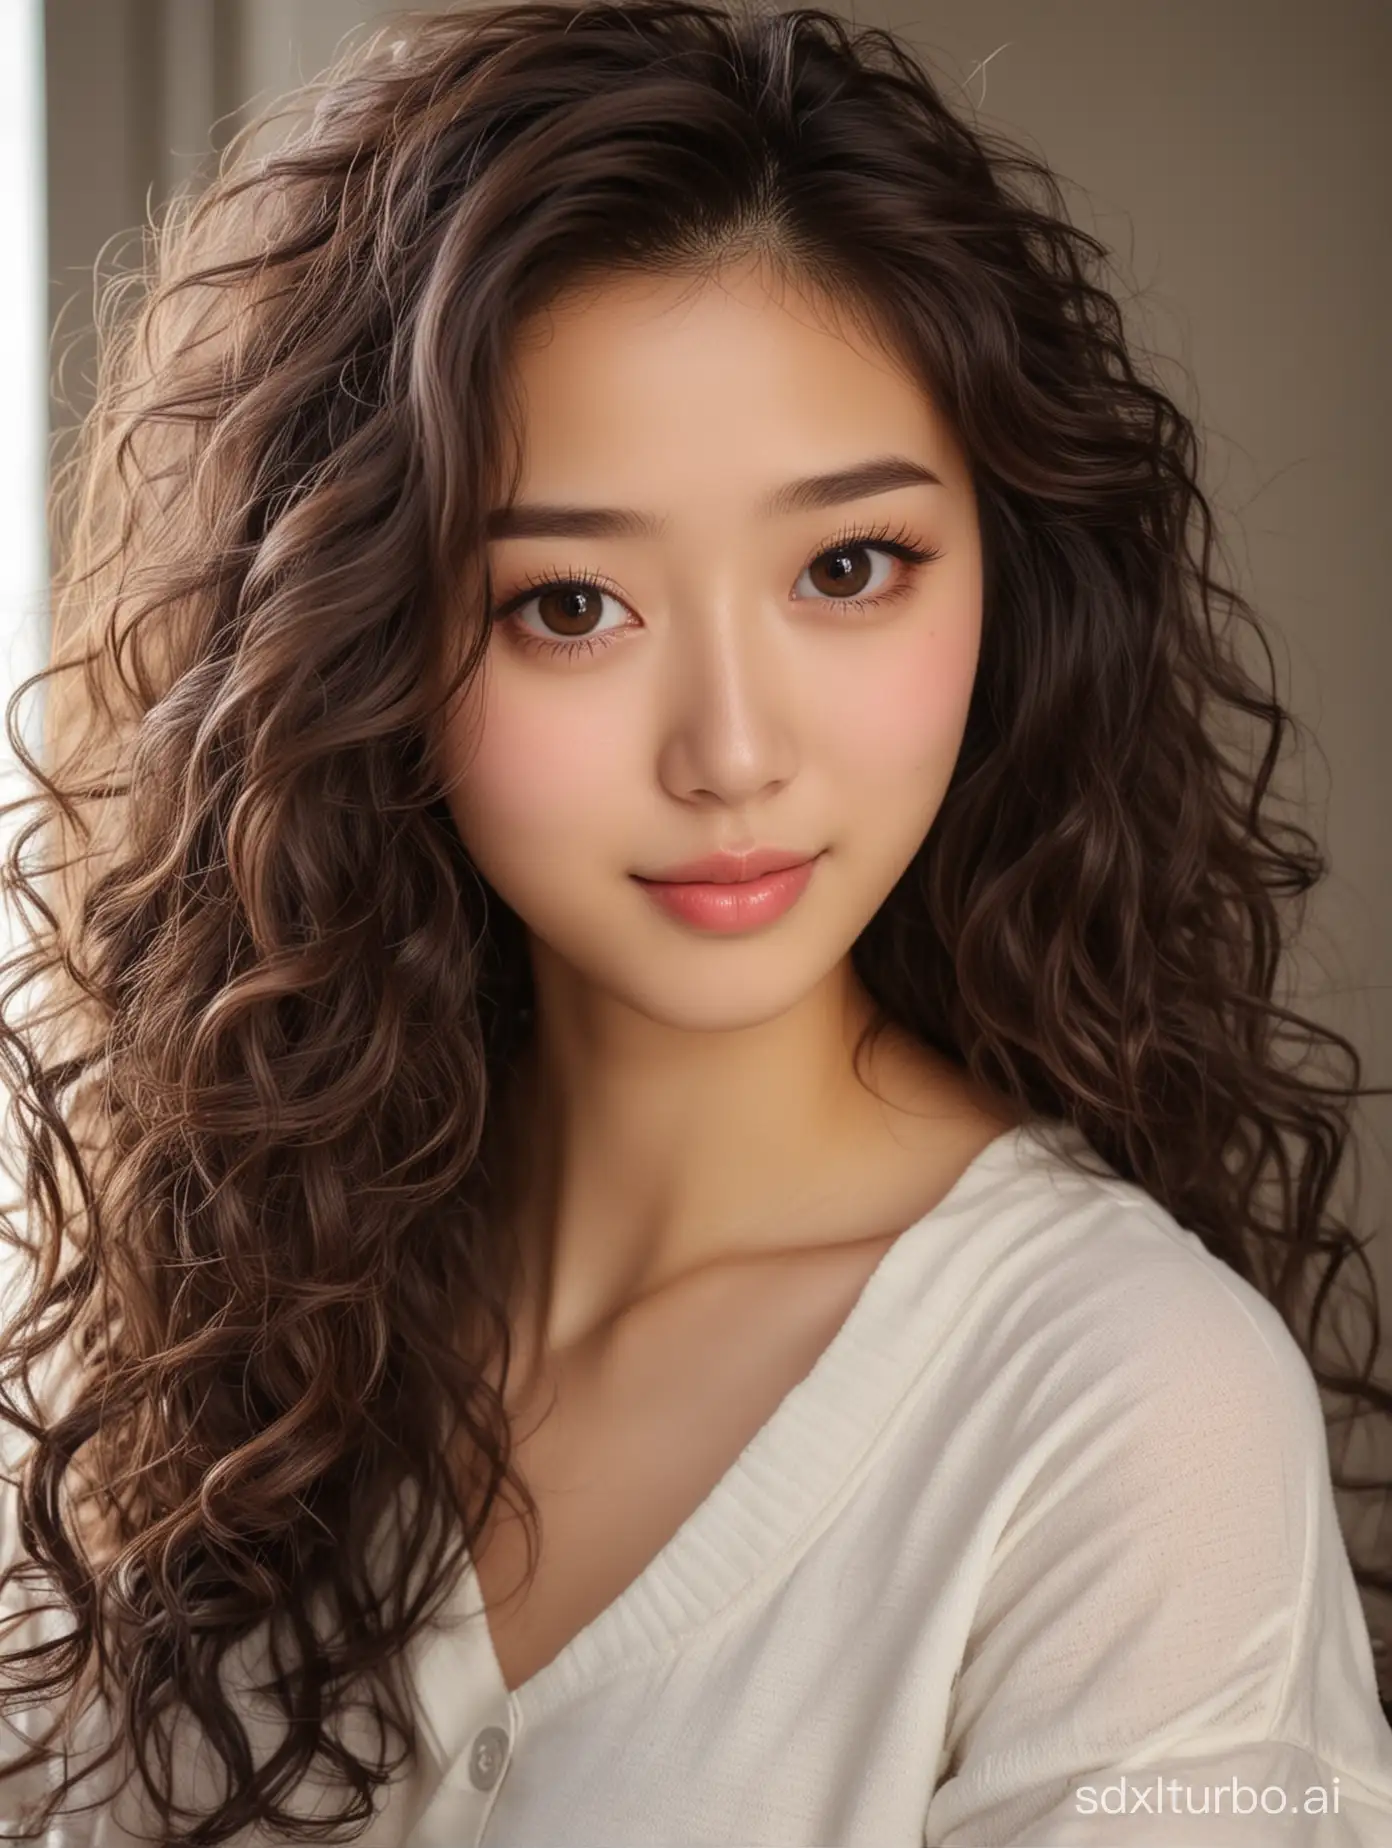 Young-Chinese-Girl-with-Curly-Hair-and-a-Welcoming-Smile